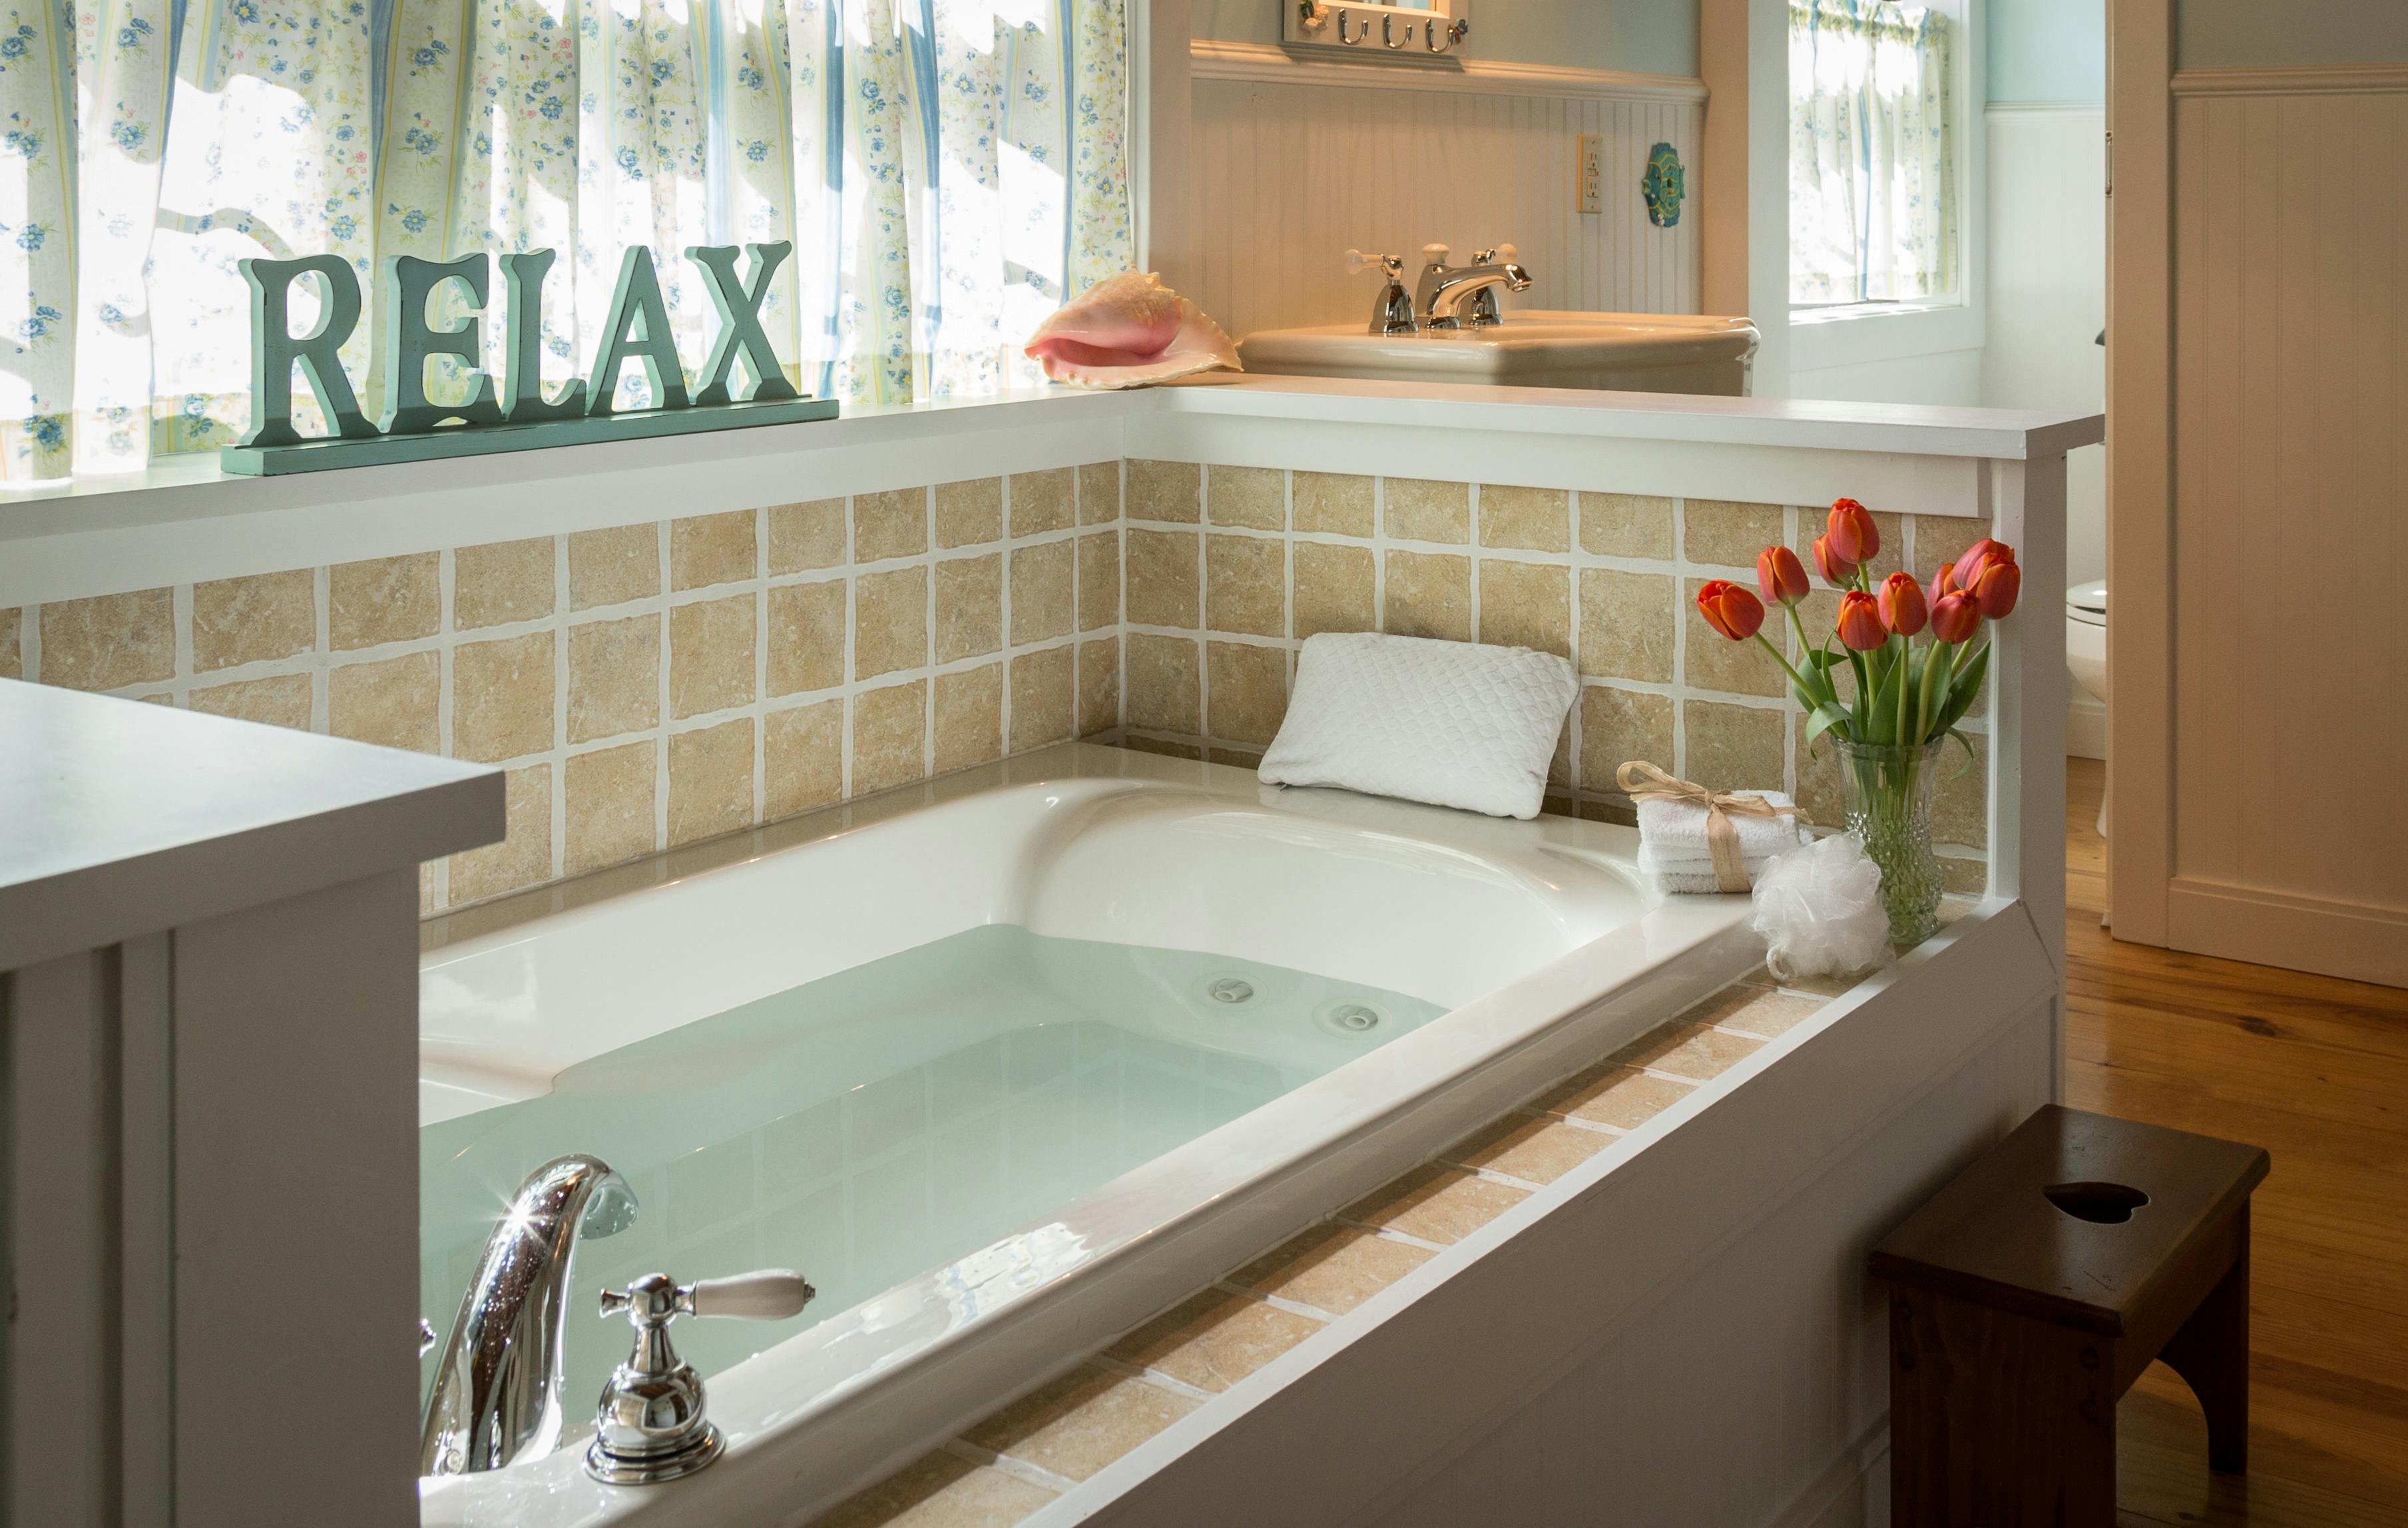 Bathroom with tiled garden tub, a vase of red tulips on ledge, and the word "relax" in wooden letters on shelf